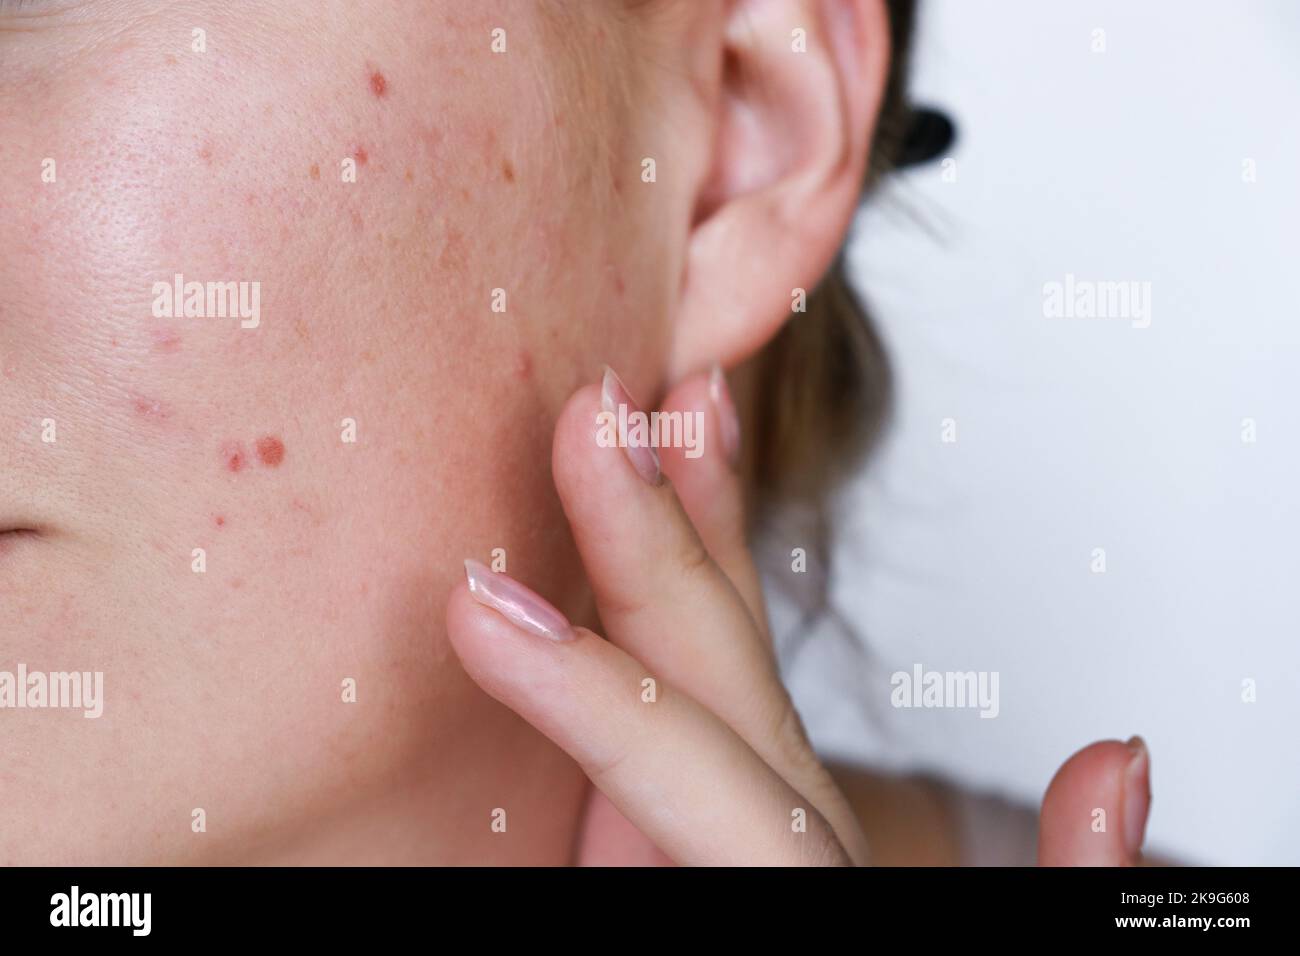 close up natural woman bad acne skin with scars  Stock Photo